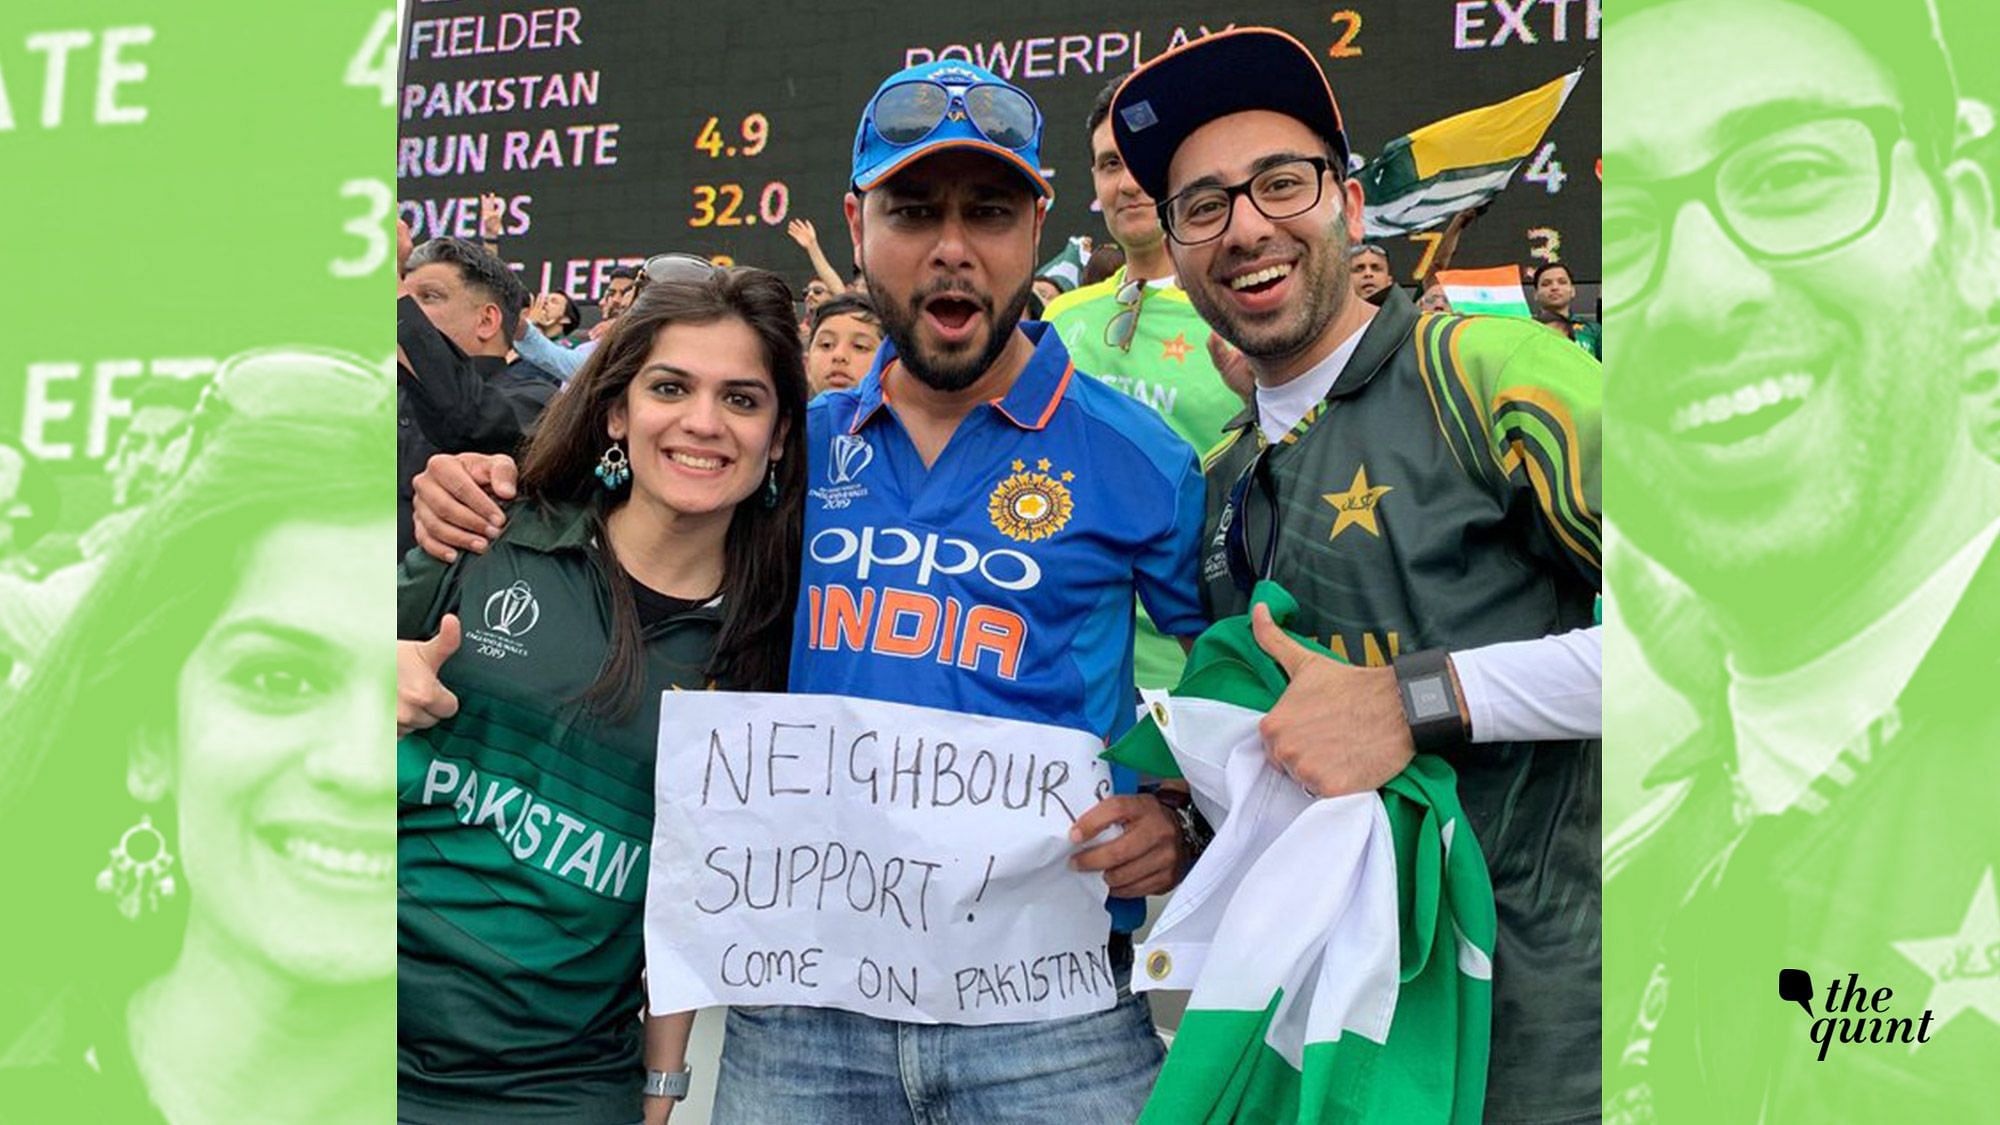 A photo of a man at Lord’s wearing the Indian jersey but cheering for Pakistan went viral on social media.